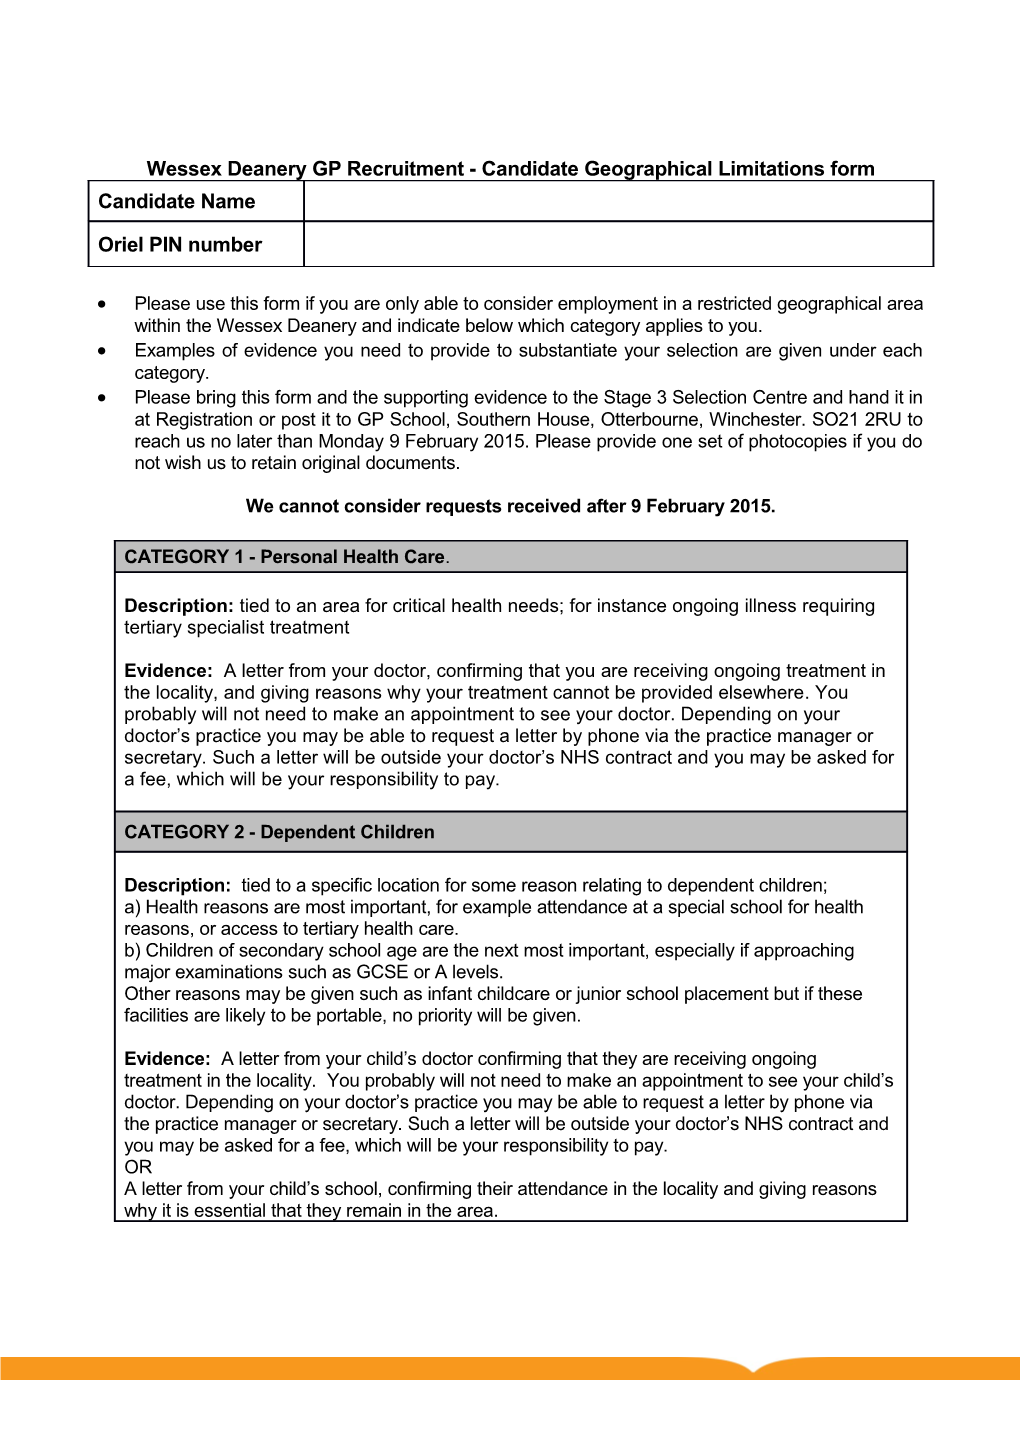 Wessex Deanery GP Recruitment - Candidate Geographical Limitations Form